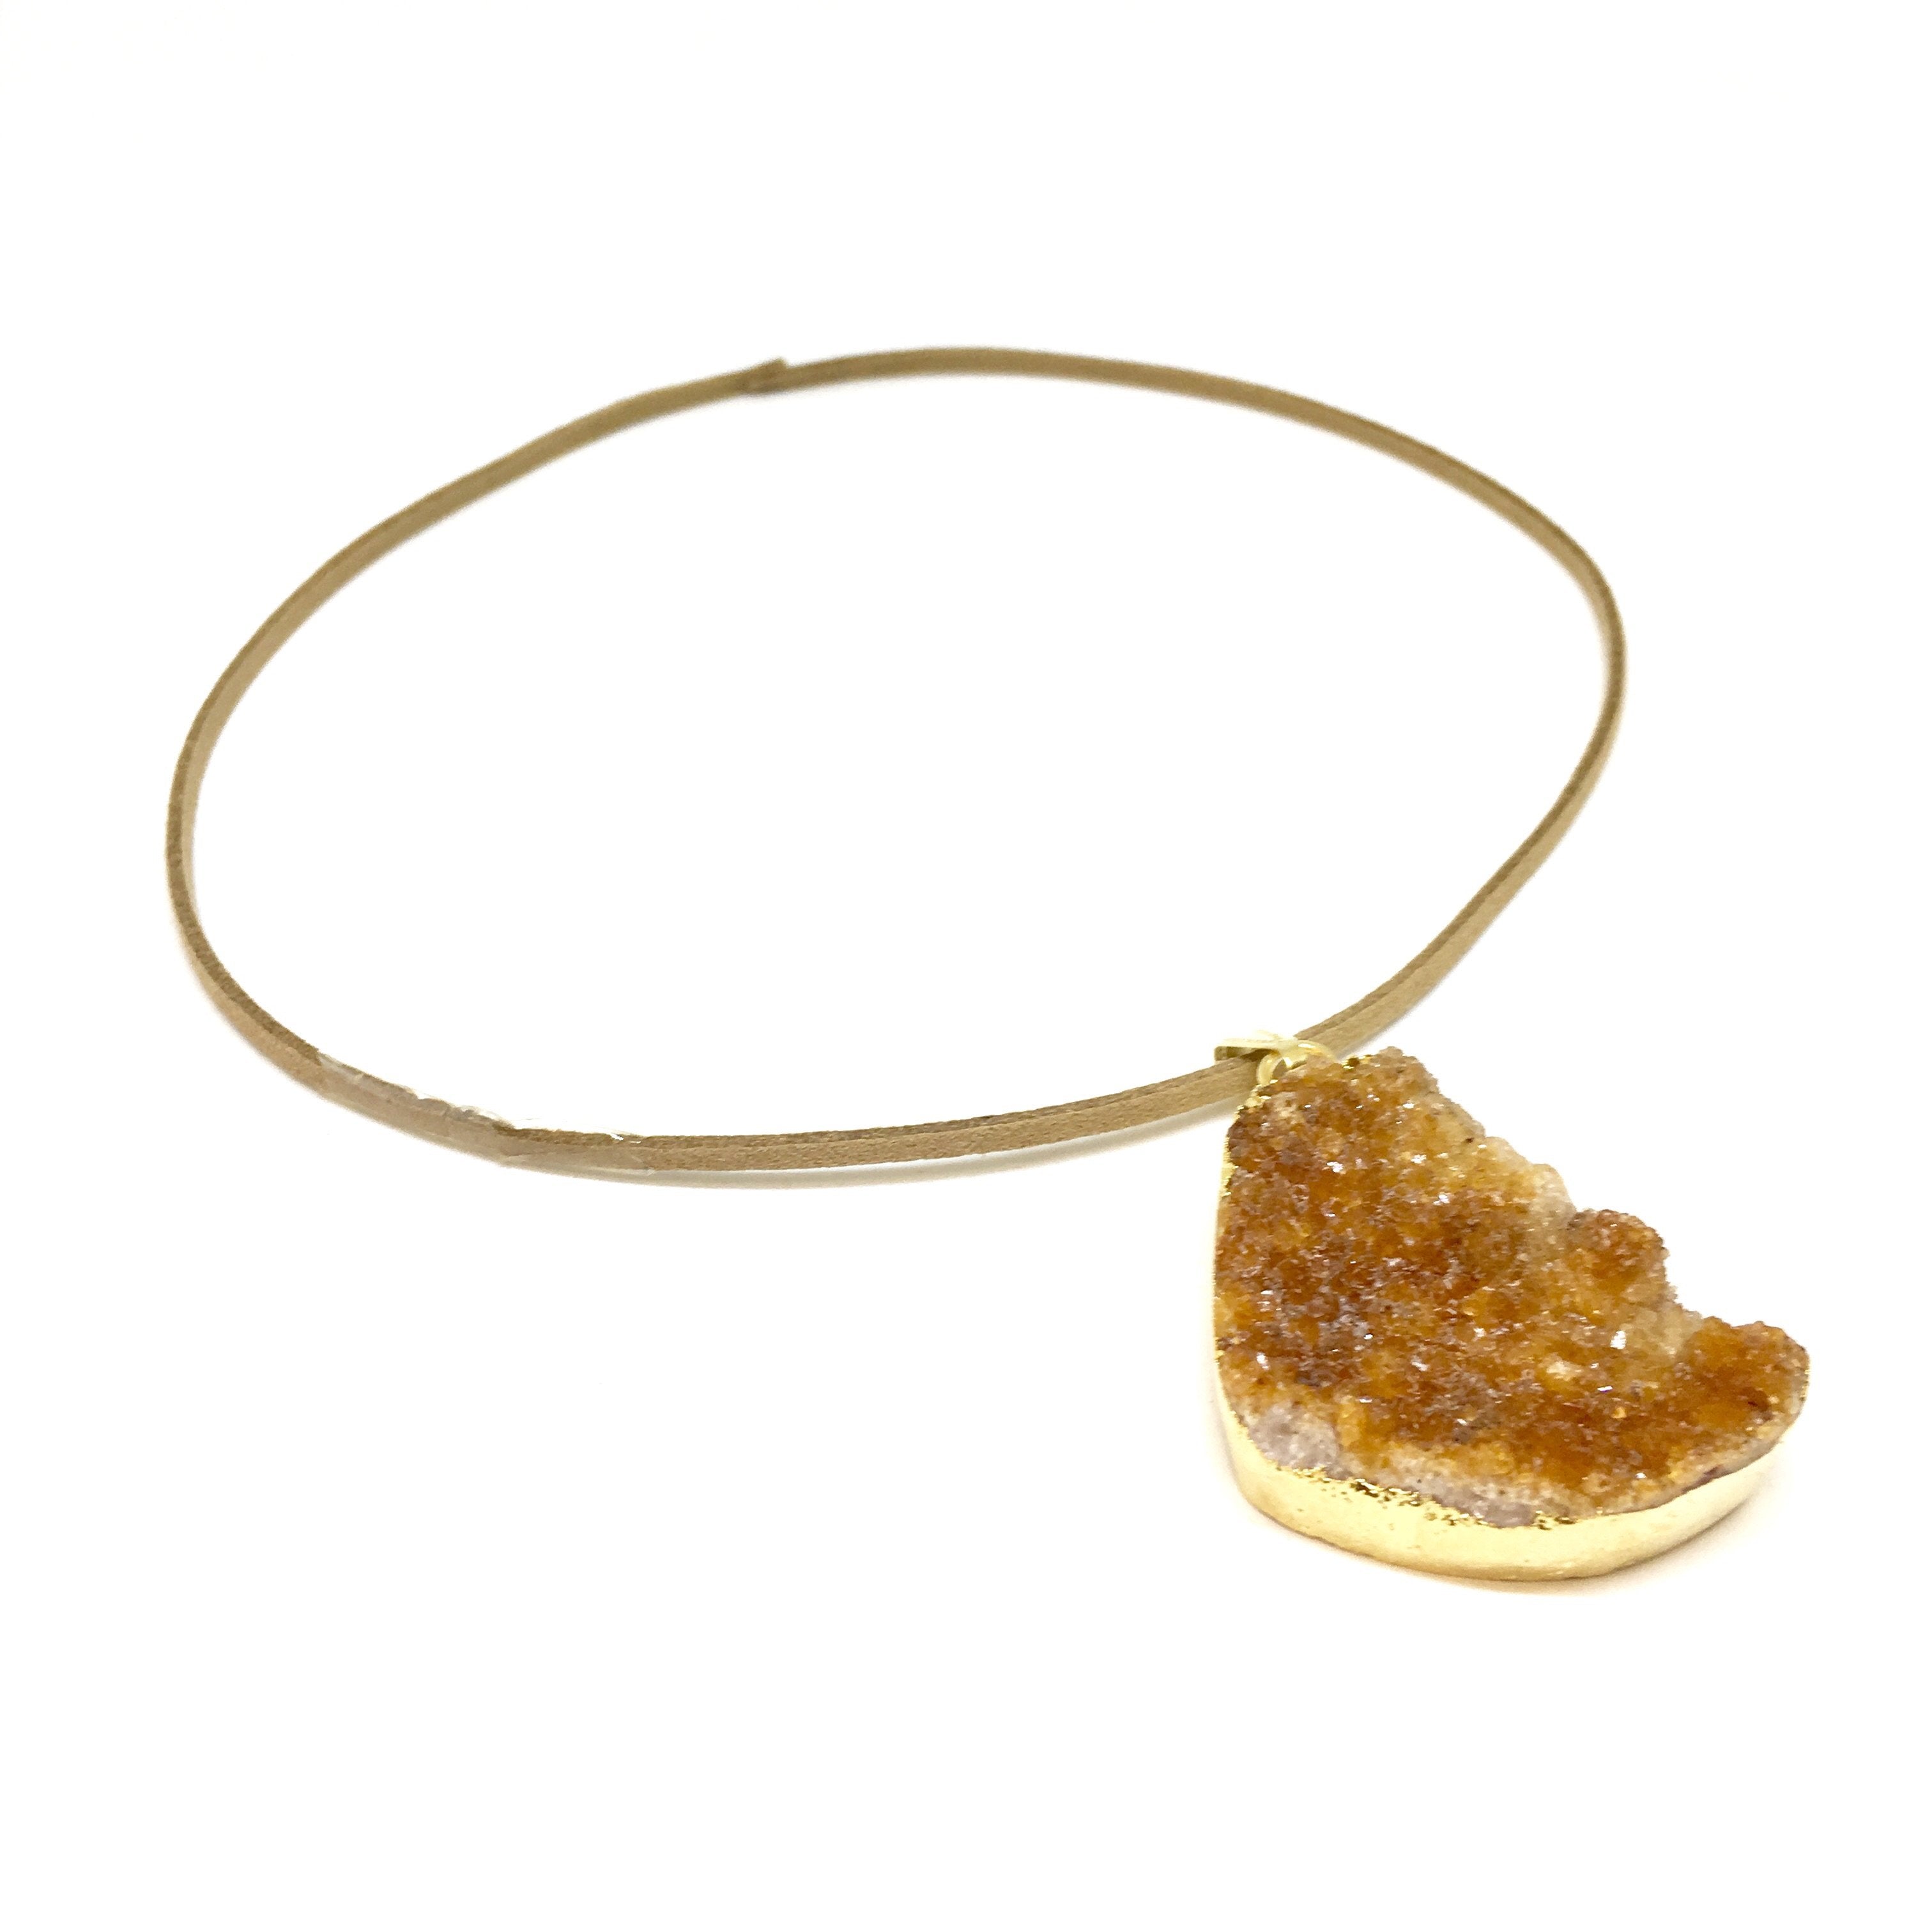 A triangular Orange Citrine Cluster Pendant with a gold clasp, displayed on a white background.